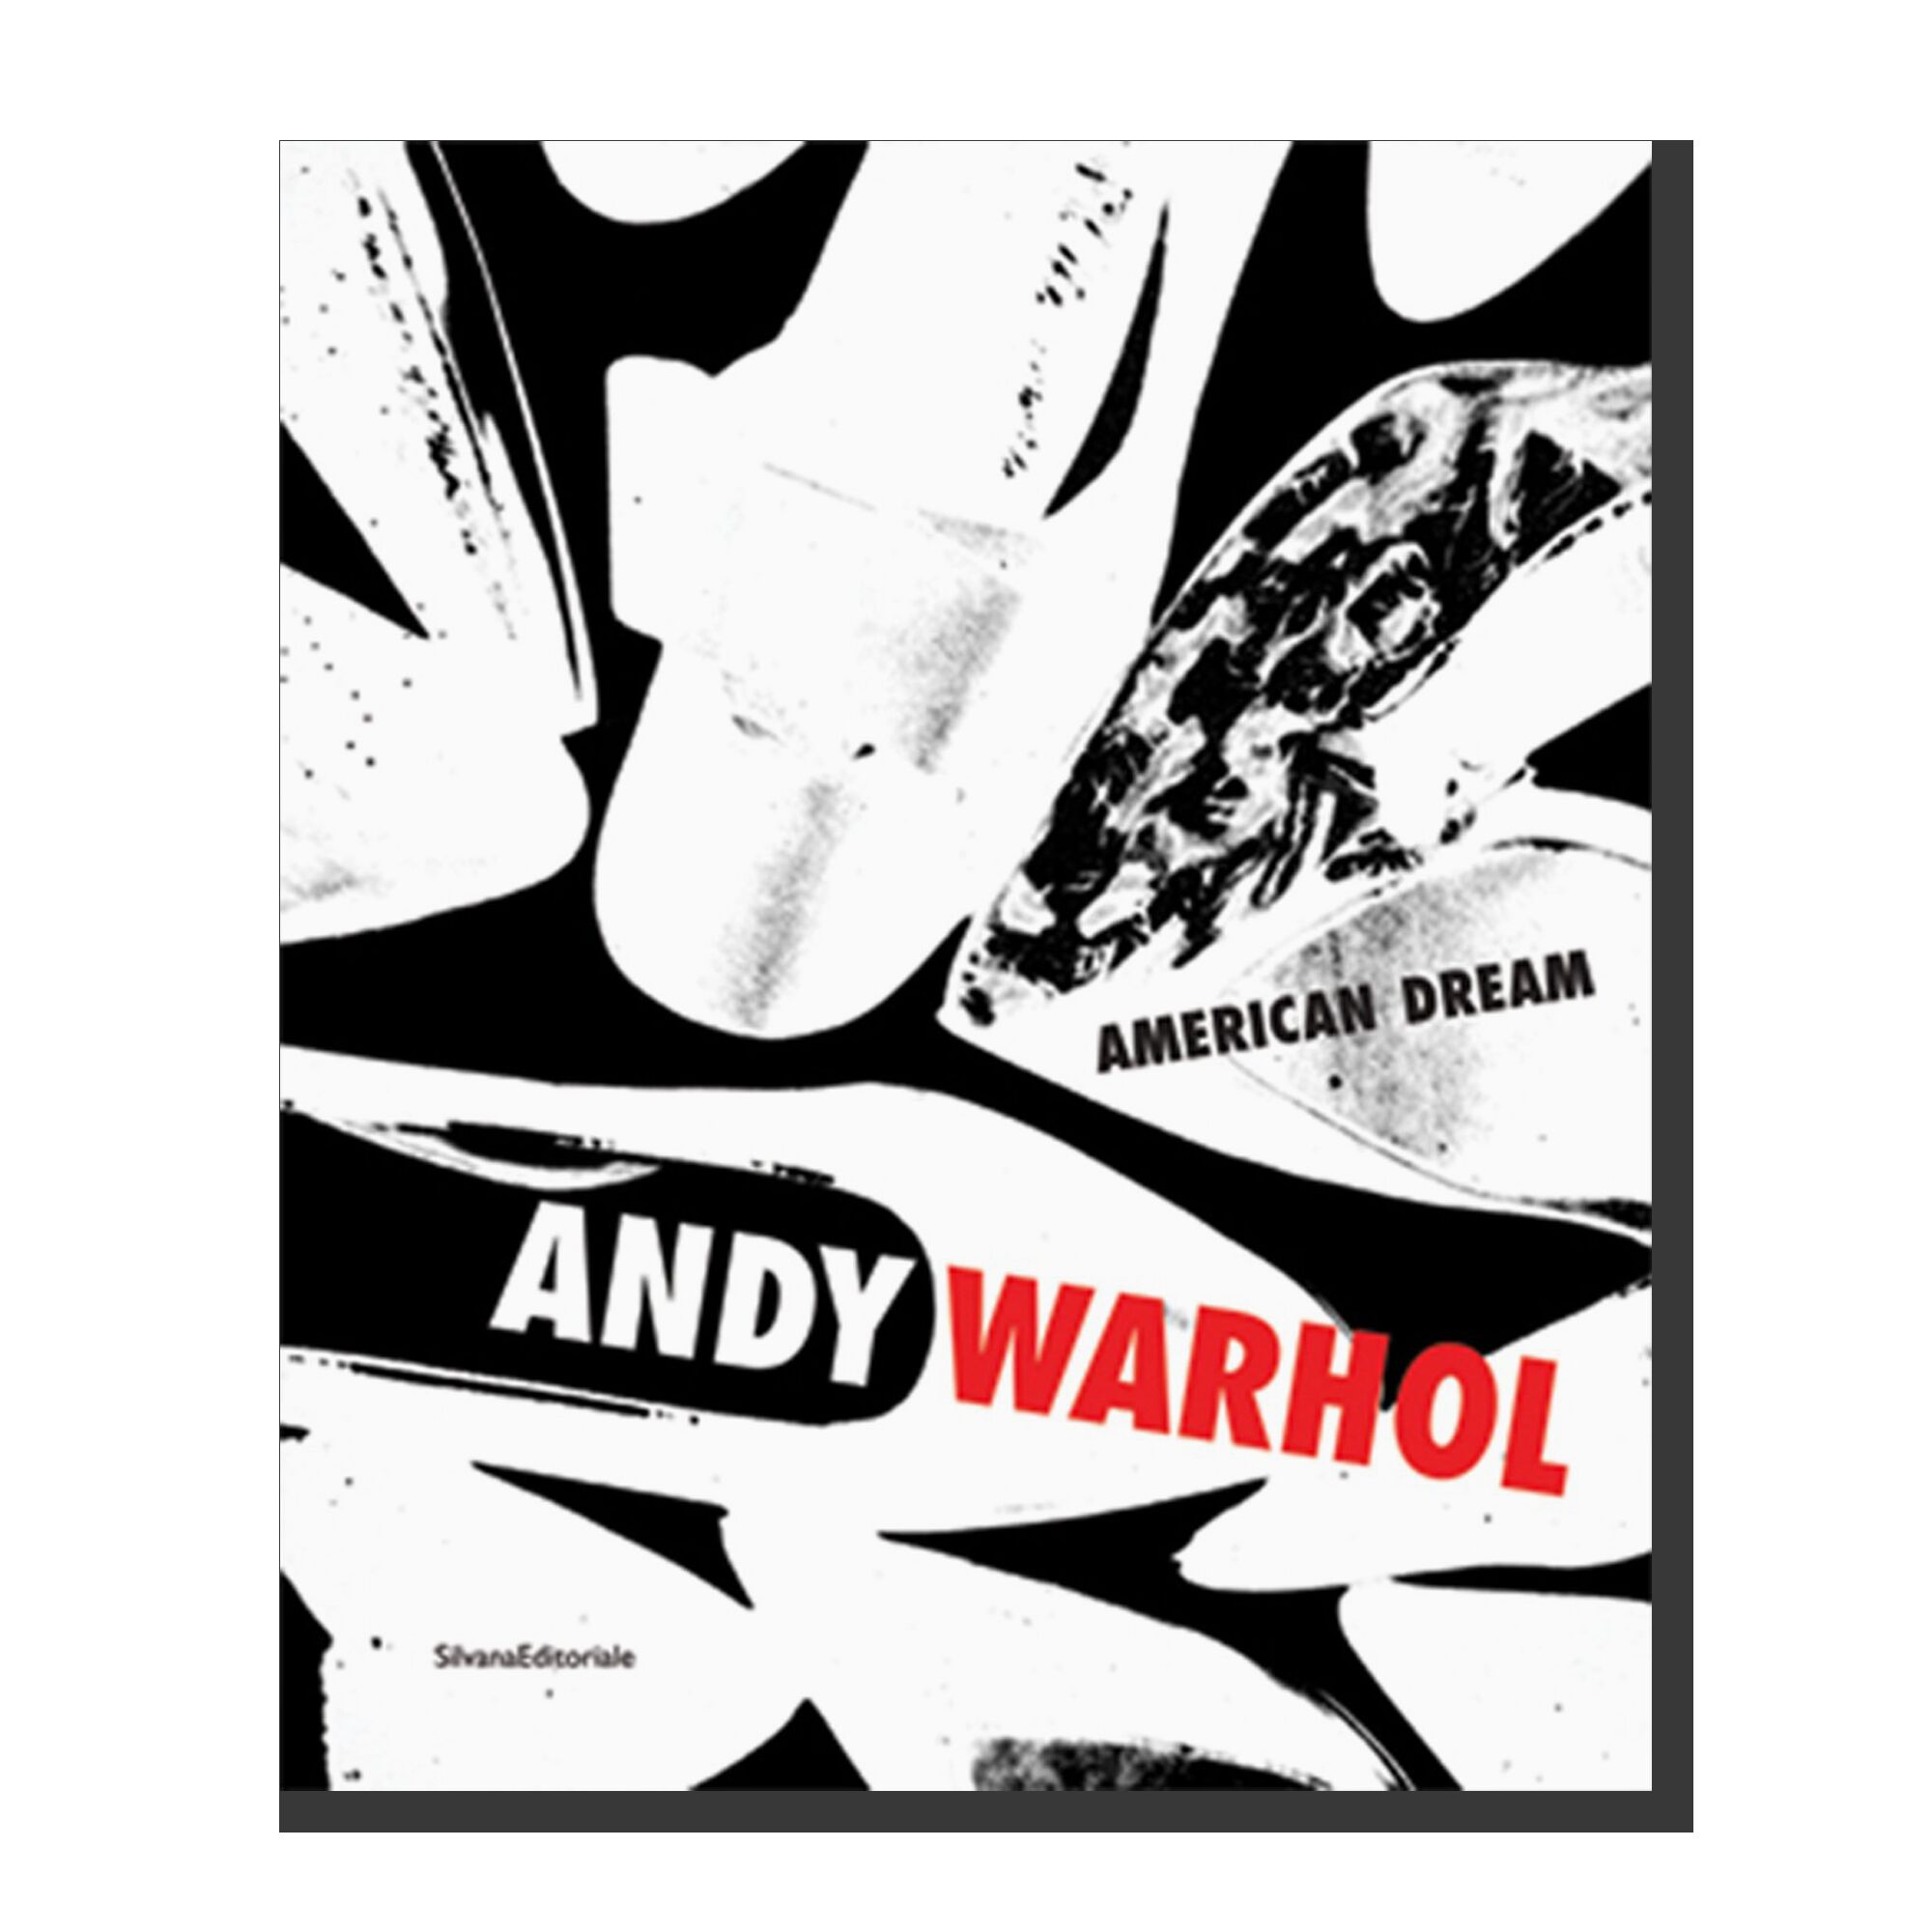 Andy Warhol: the American Dream